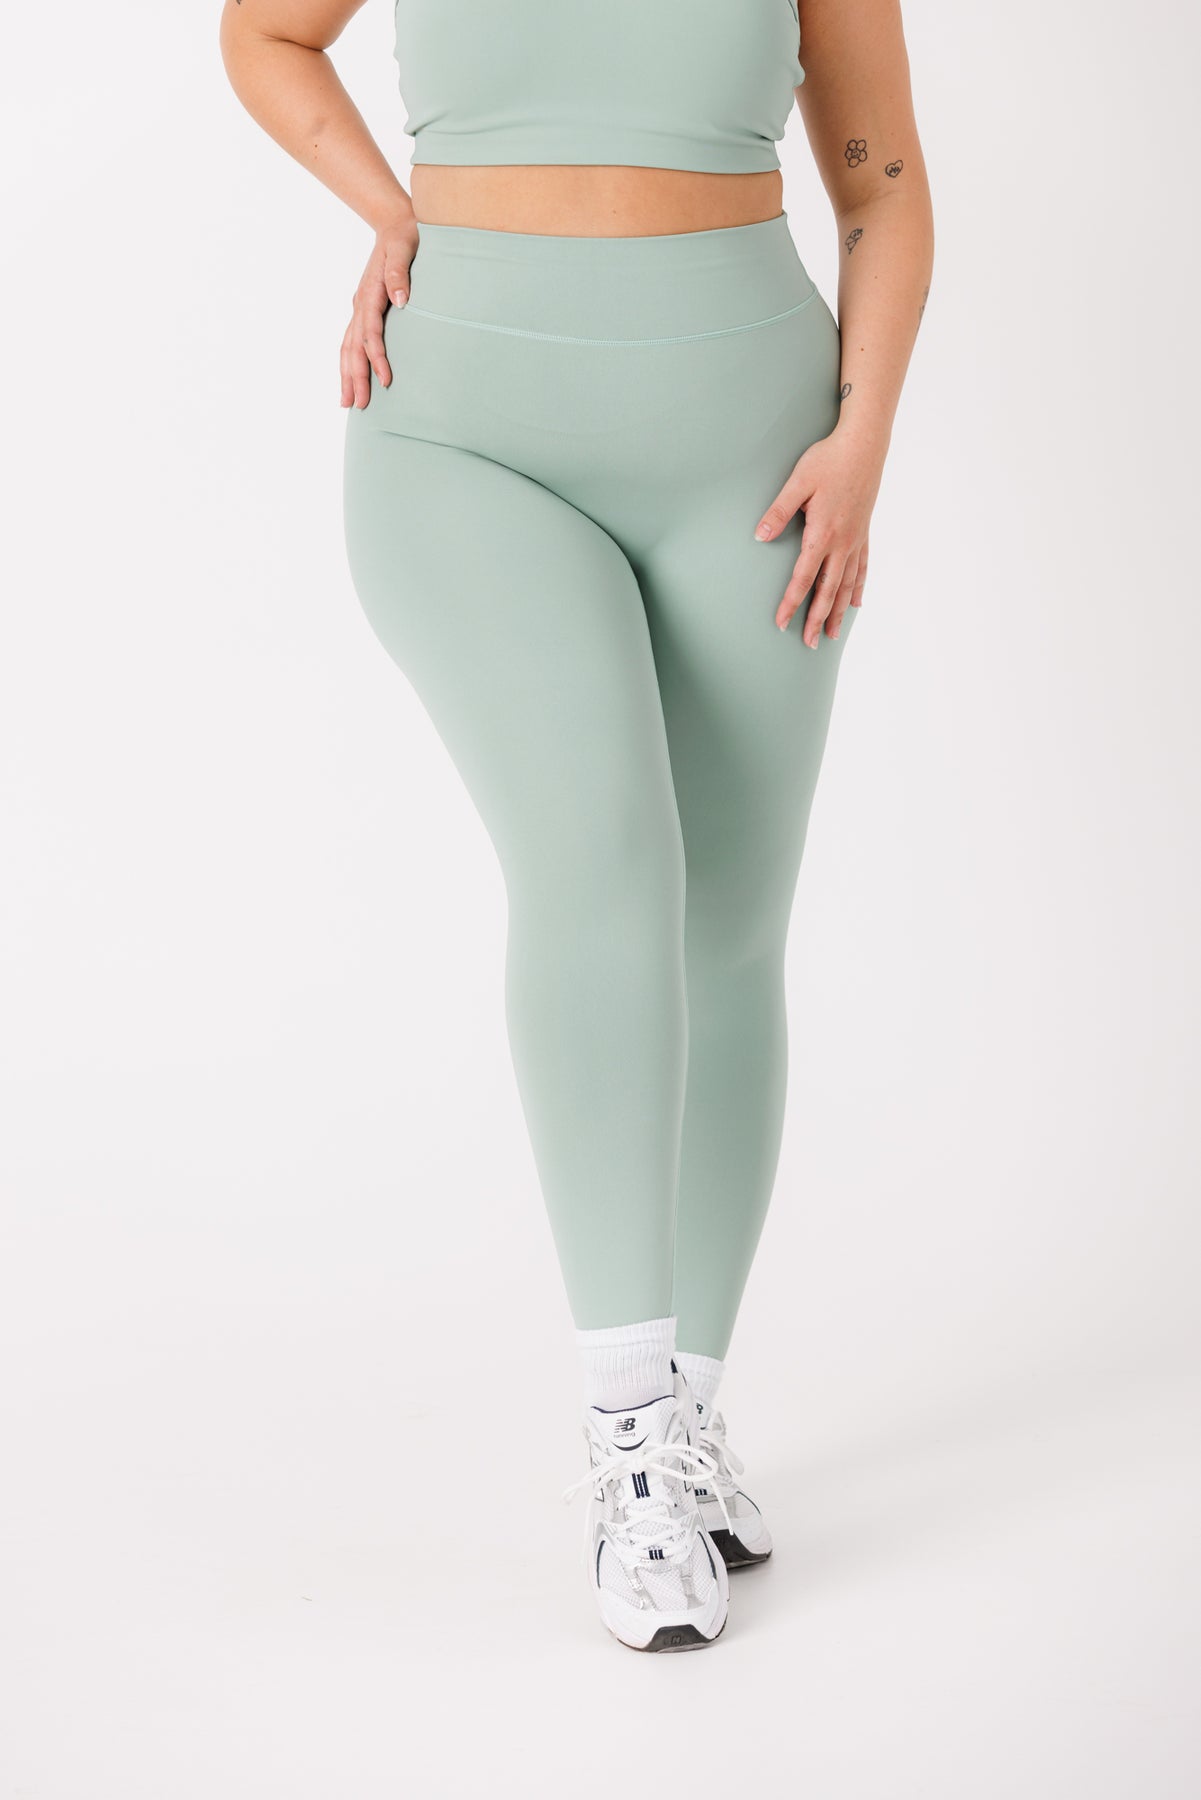 Women's Active Leggings Featuring Star Accents Down the Sides. (6 Pack) -  High Waisted Design - Breathable, Moisture Wicking Fabric - Squat Proof 4  Way Stretch - 88% Polyester, 12% Spandex 